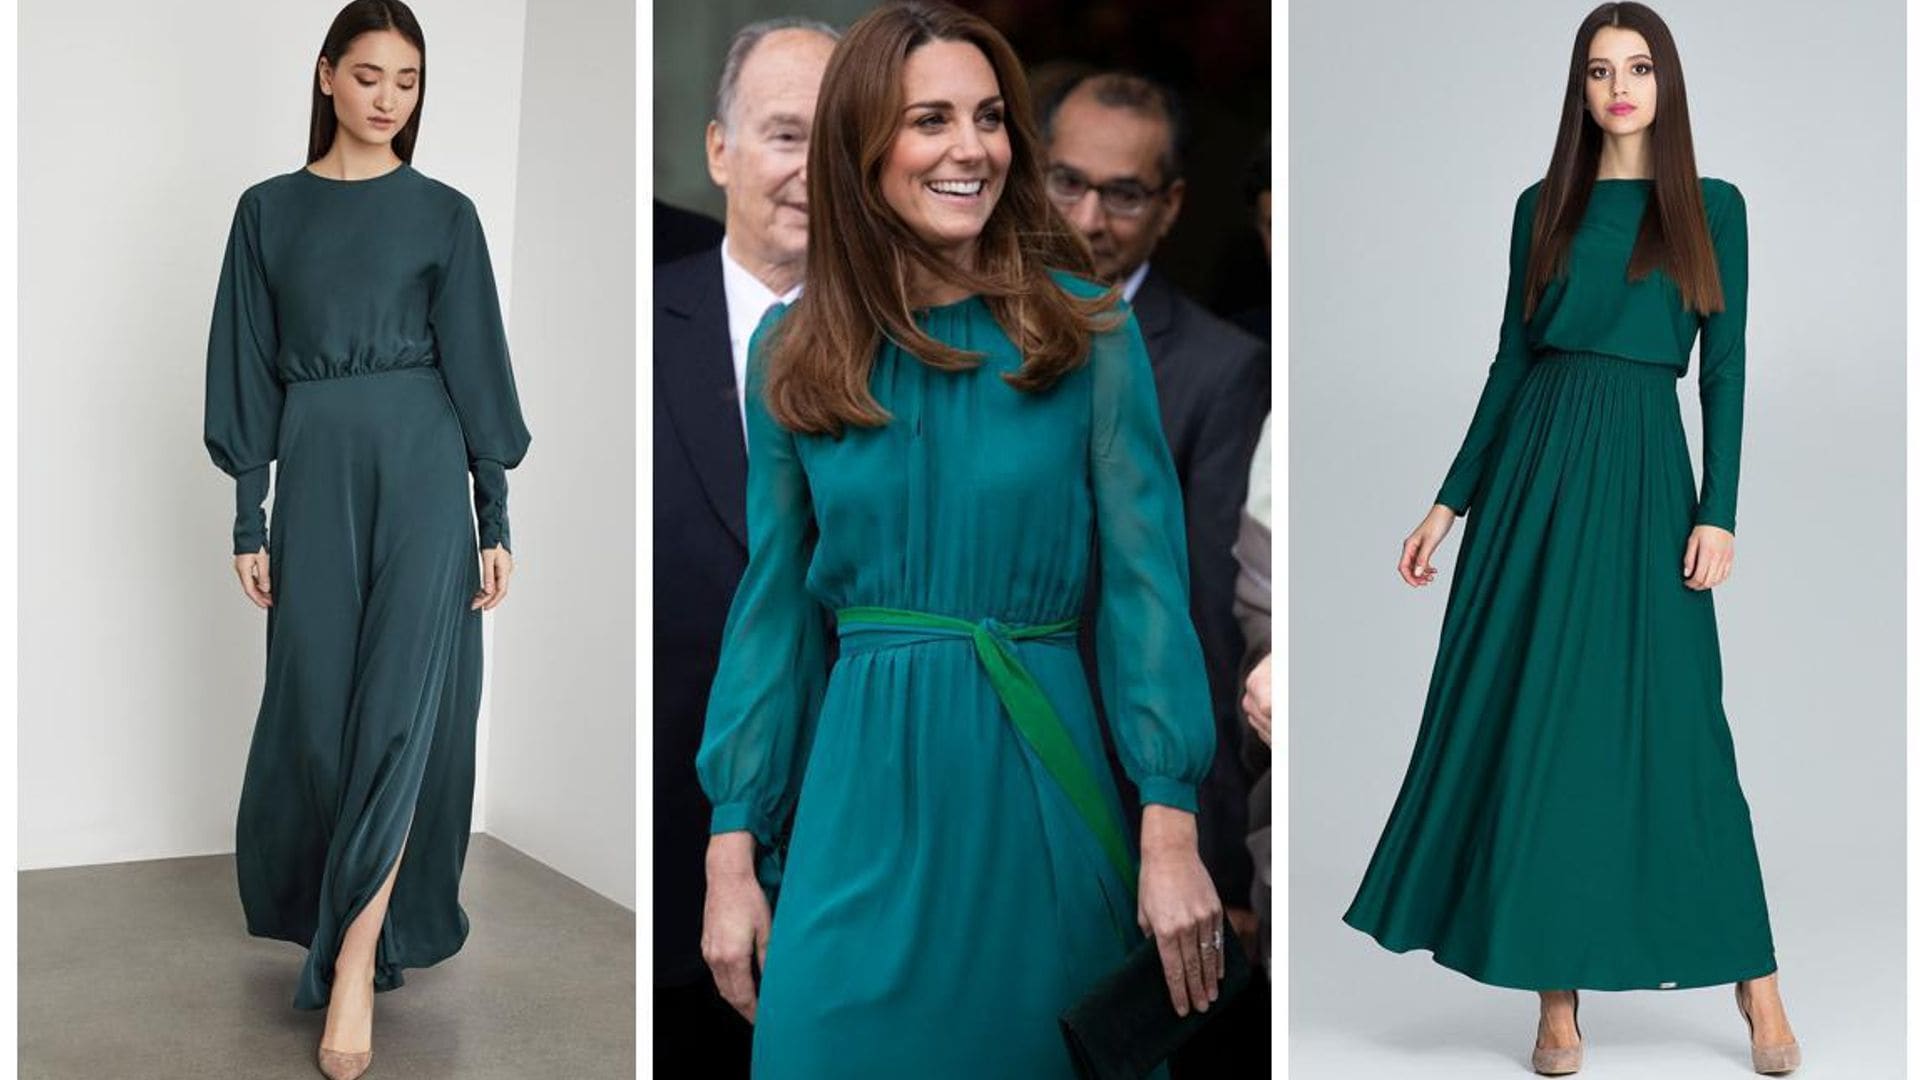 Love Kate Middleton's teal maxi dress? Get the look for less